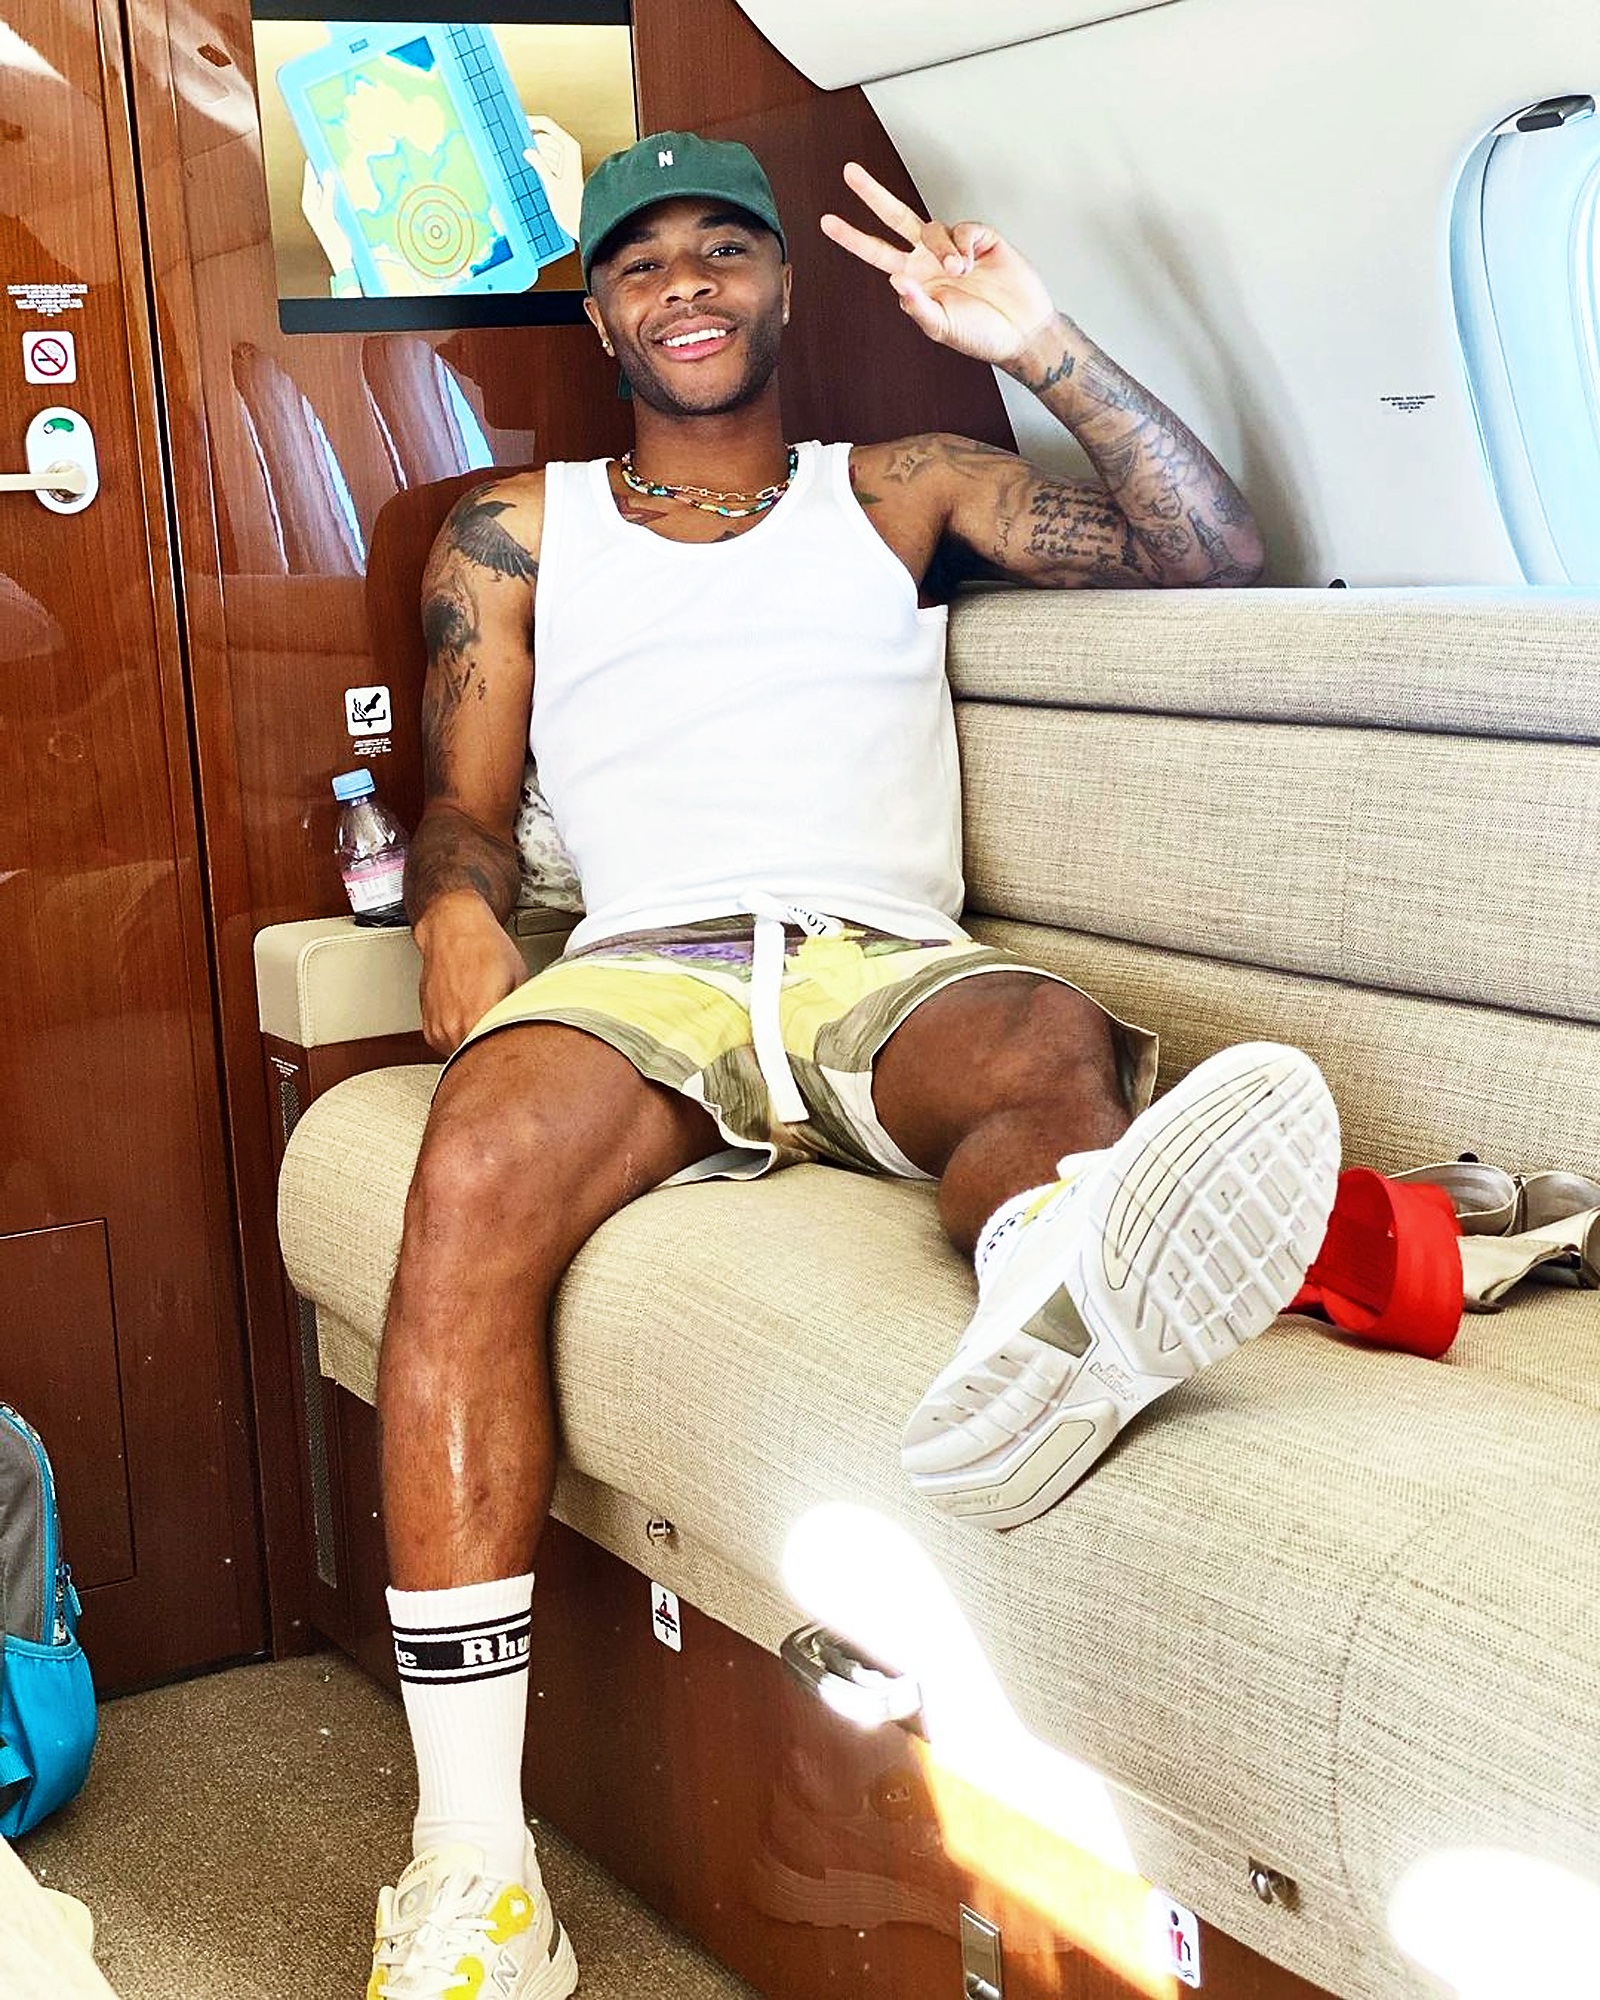 Raheem Sterling is enjoying a well-earned rest after a stunning summer